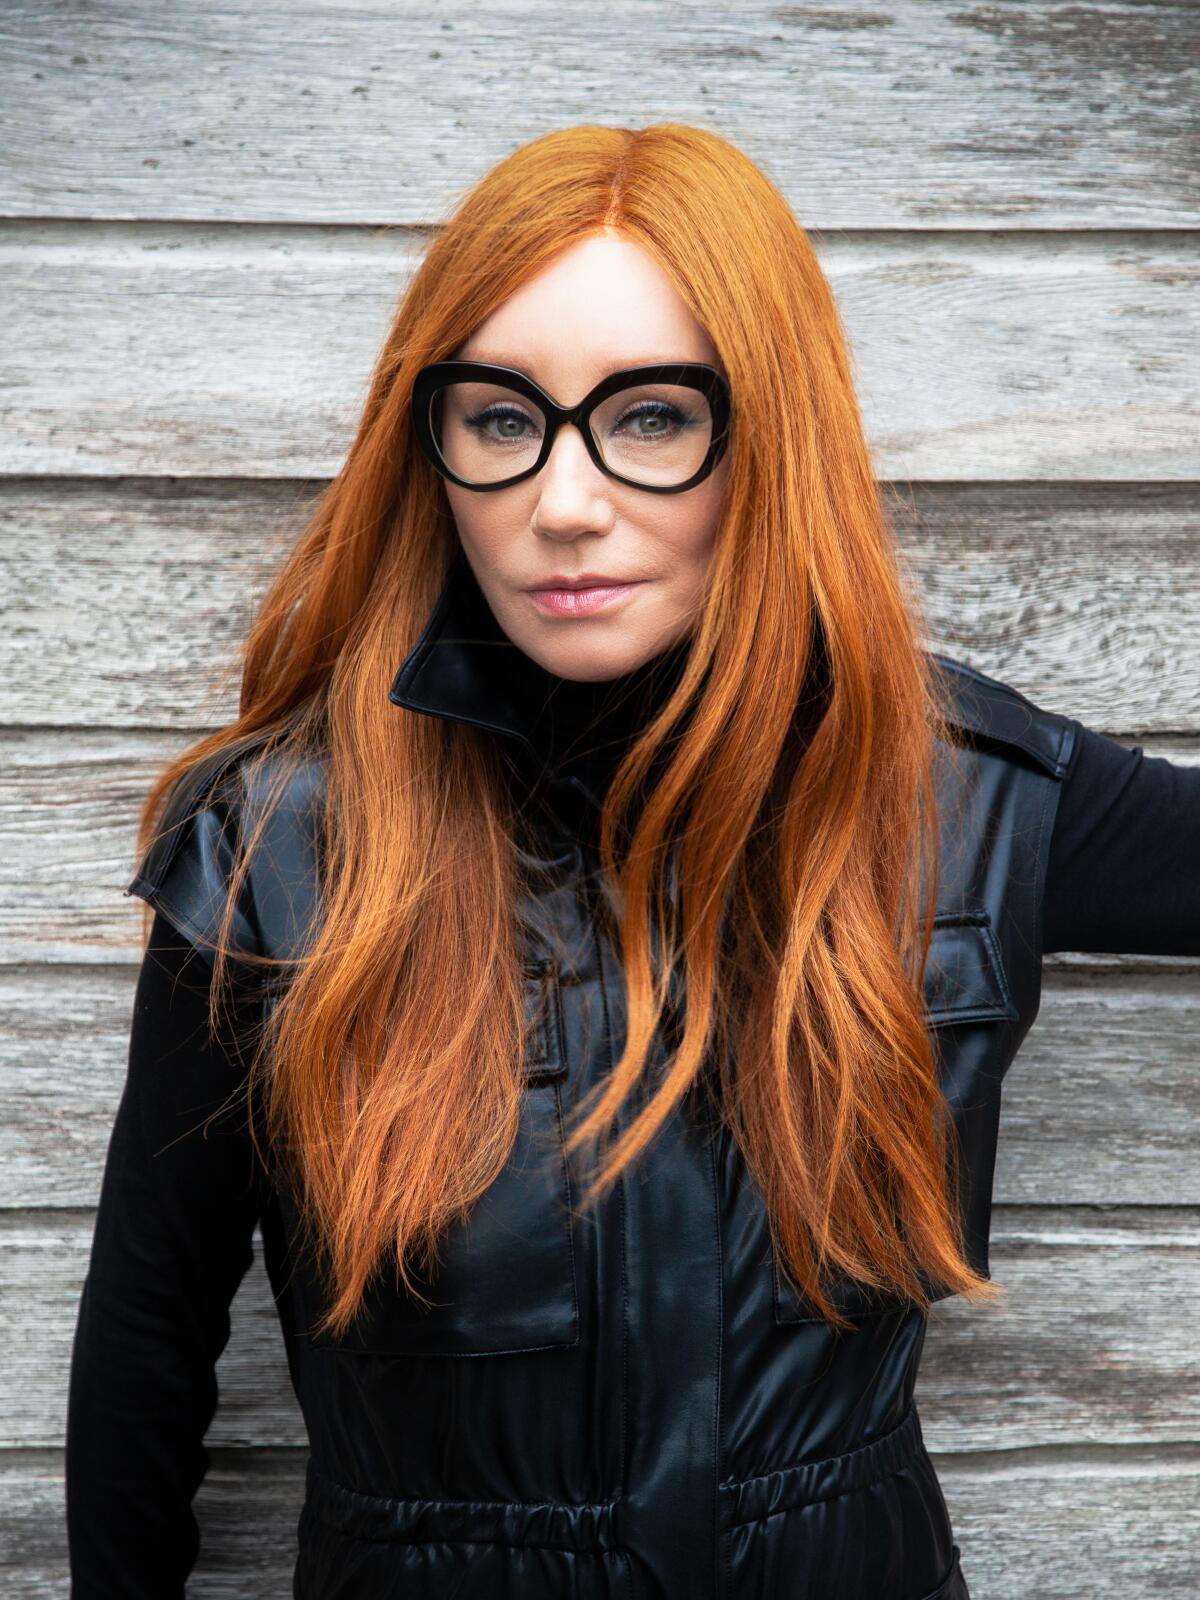 A woman with long red hair, black-framed glasses and a black leather jacket.